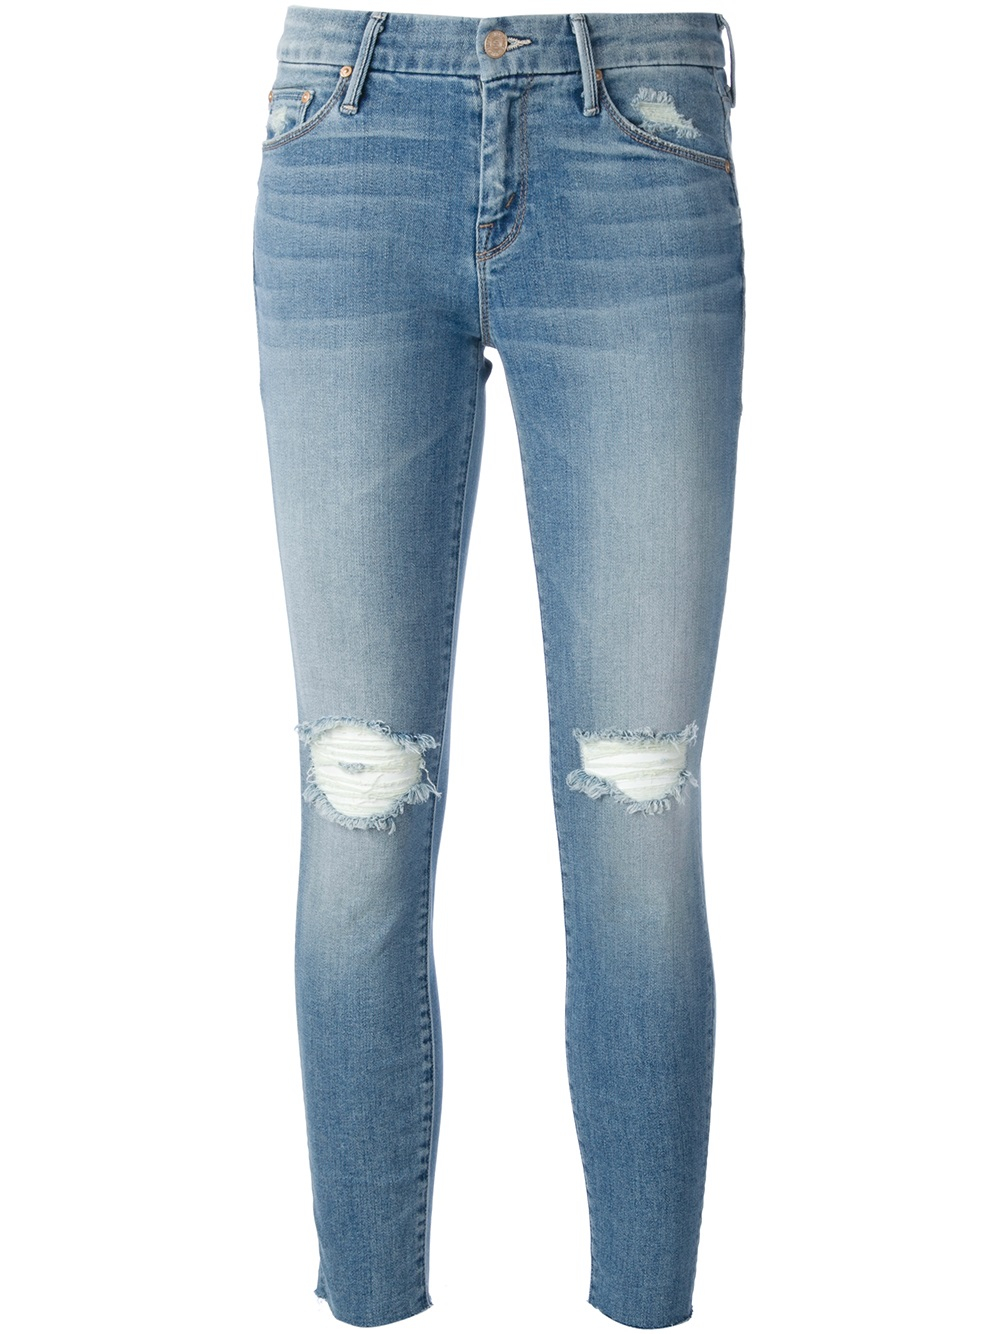 Lyst - Mother Looker Cropped Skinny Jeans in Blue